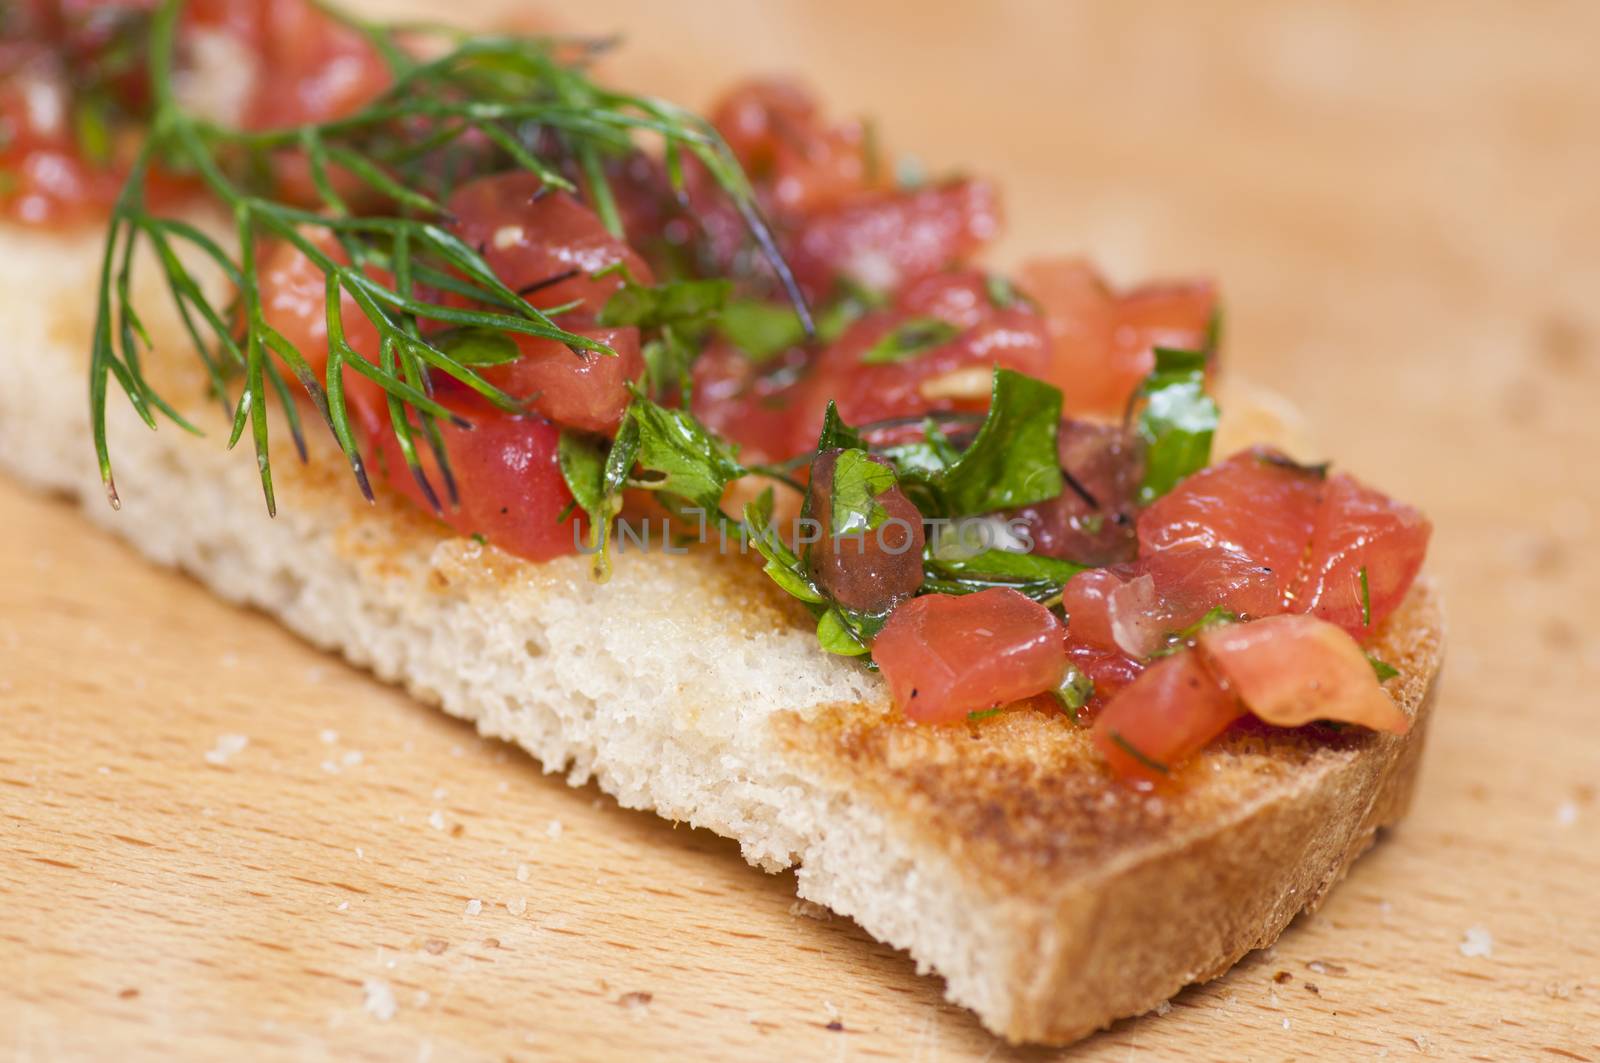 Italian bruschetta topped with tomatoes and dill